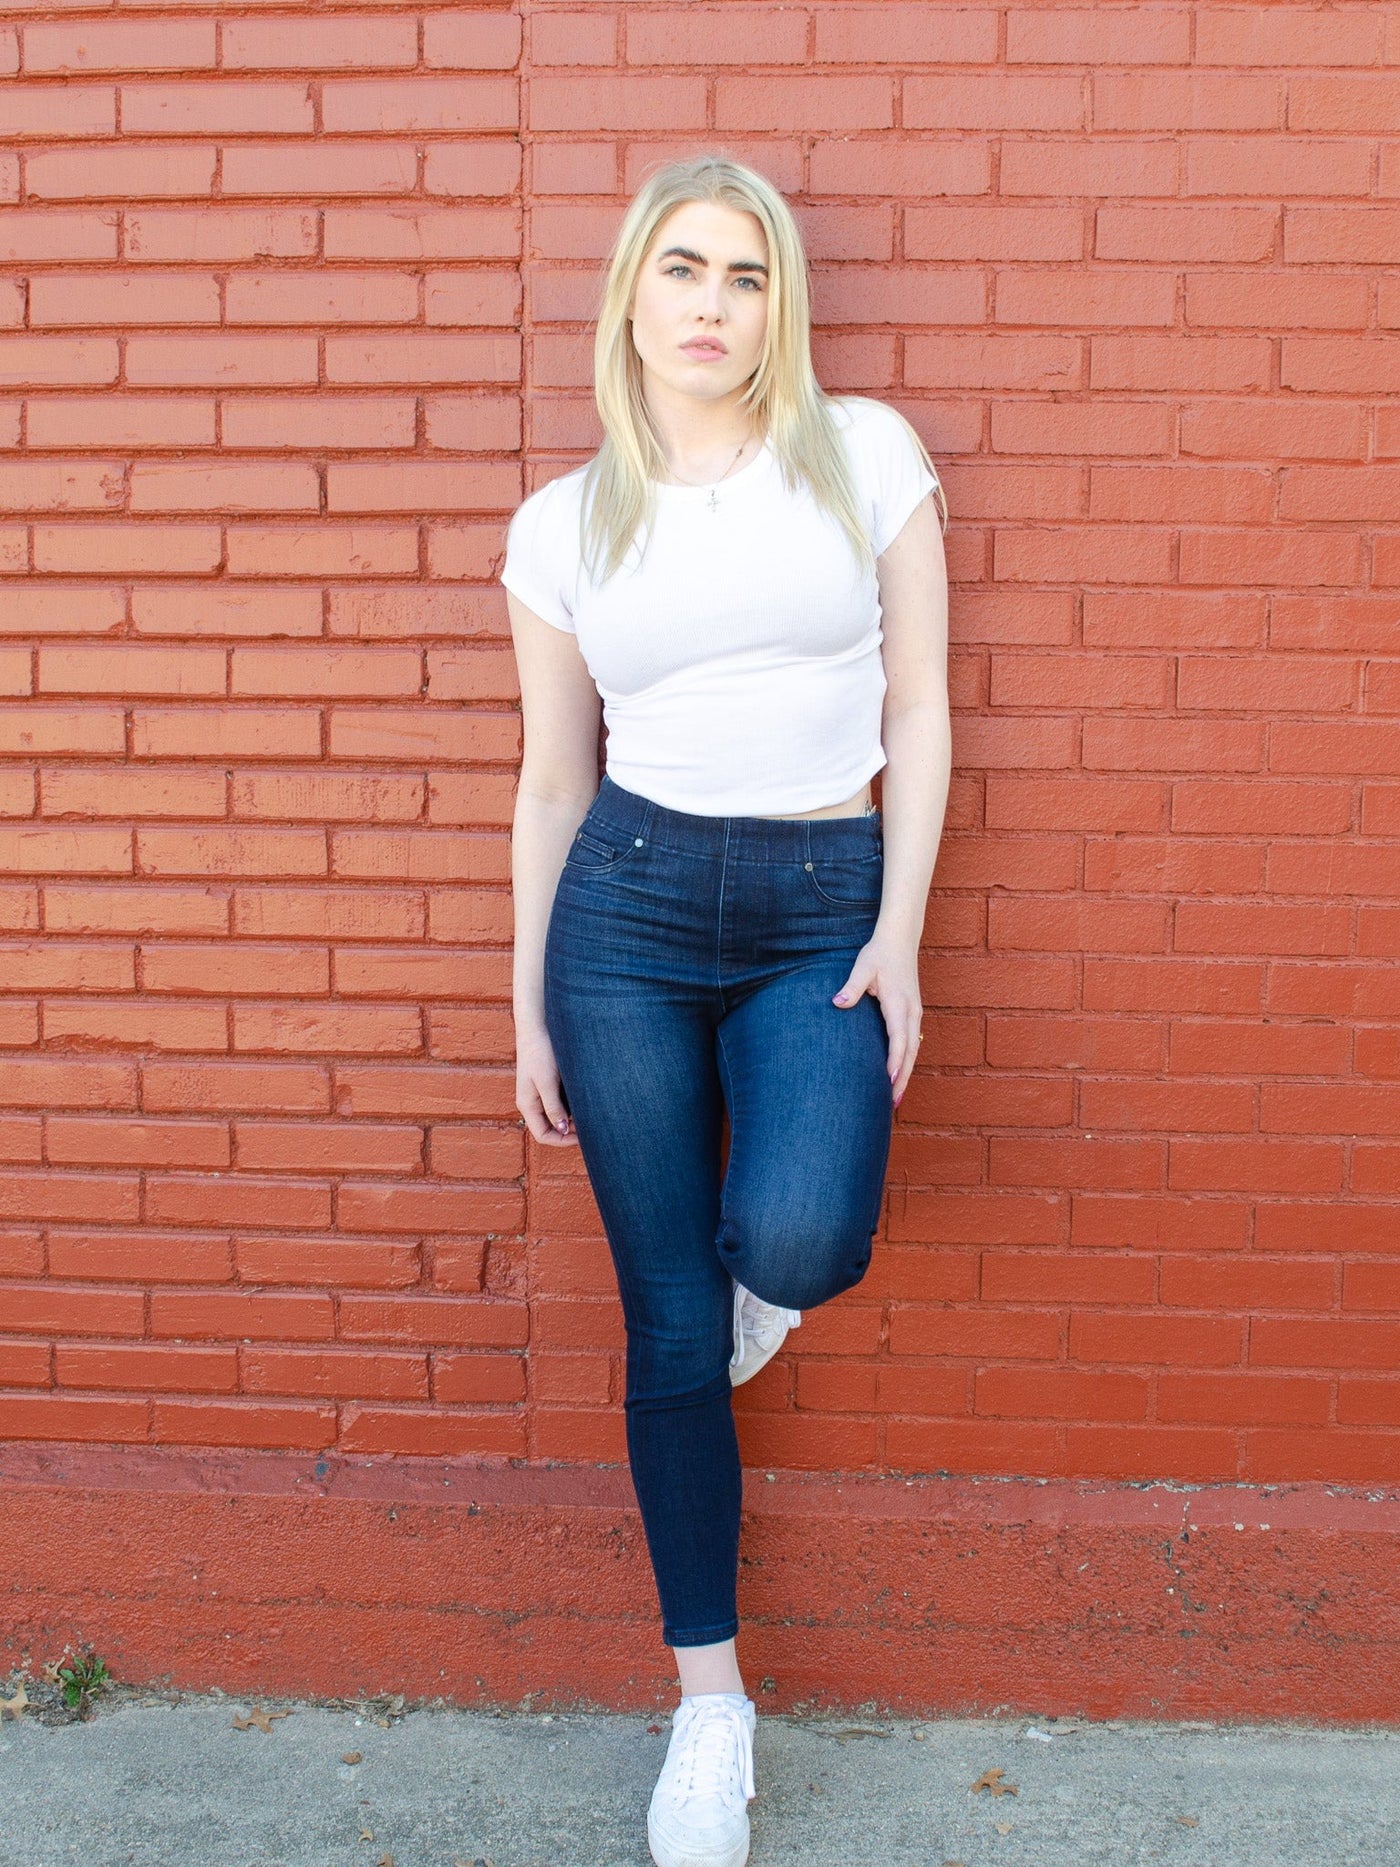 Model is wearing a dark wash skinny jean with a glide on feature that creates a easy glide on fit. Jeans are paired with a white tee